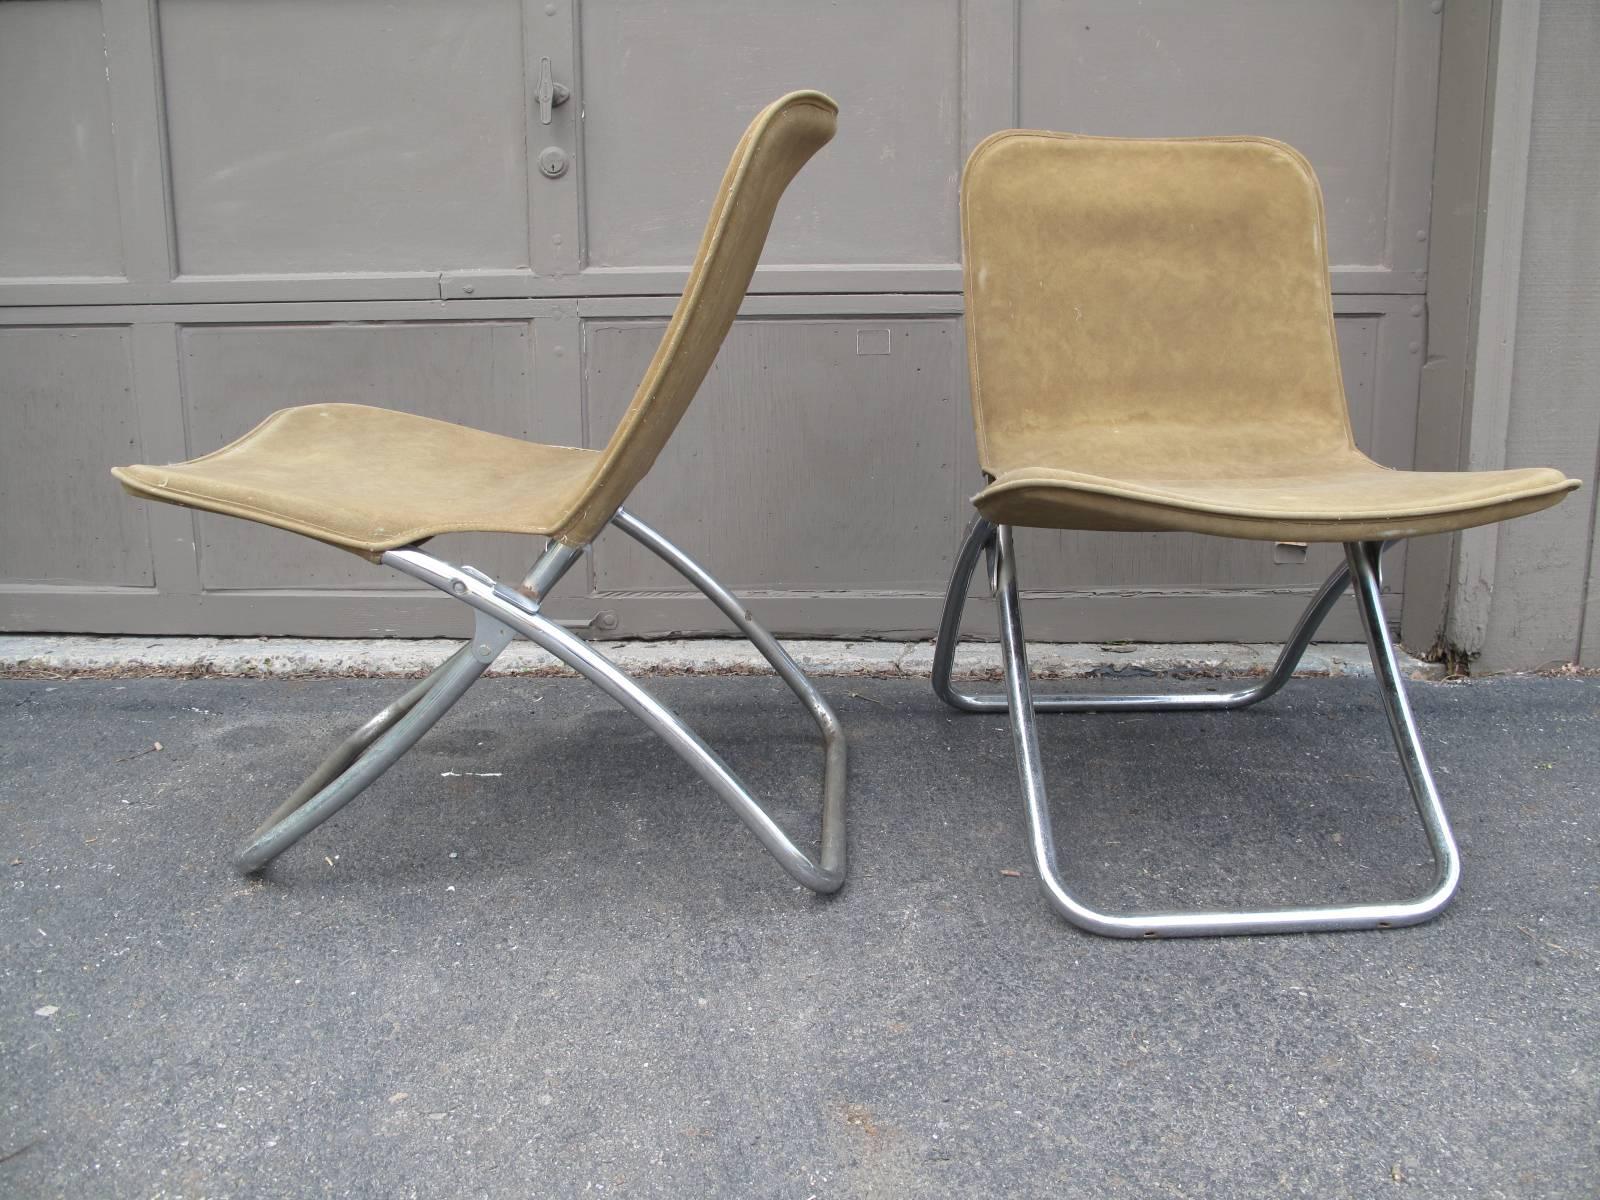 Two 1960s American tubular aluminum folding chairs with original faux suede covers.